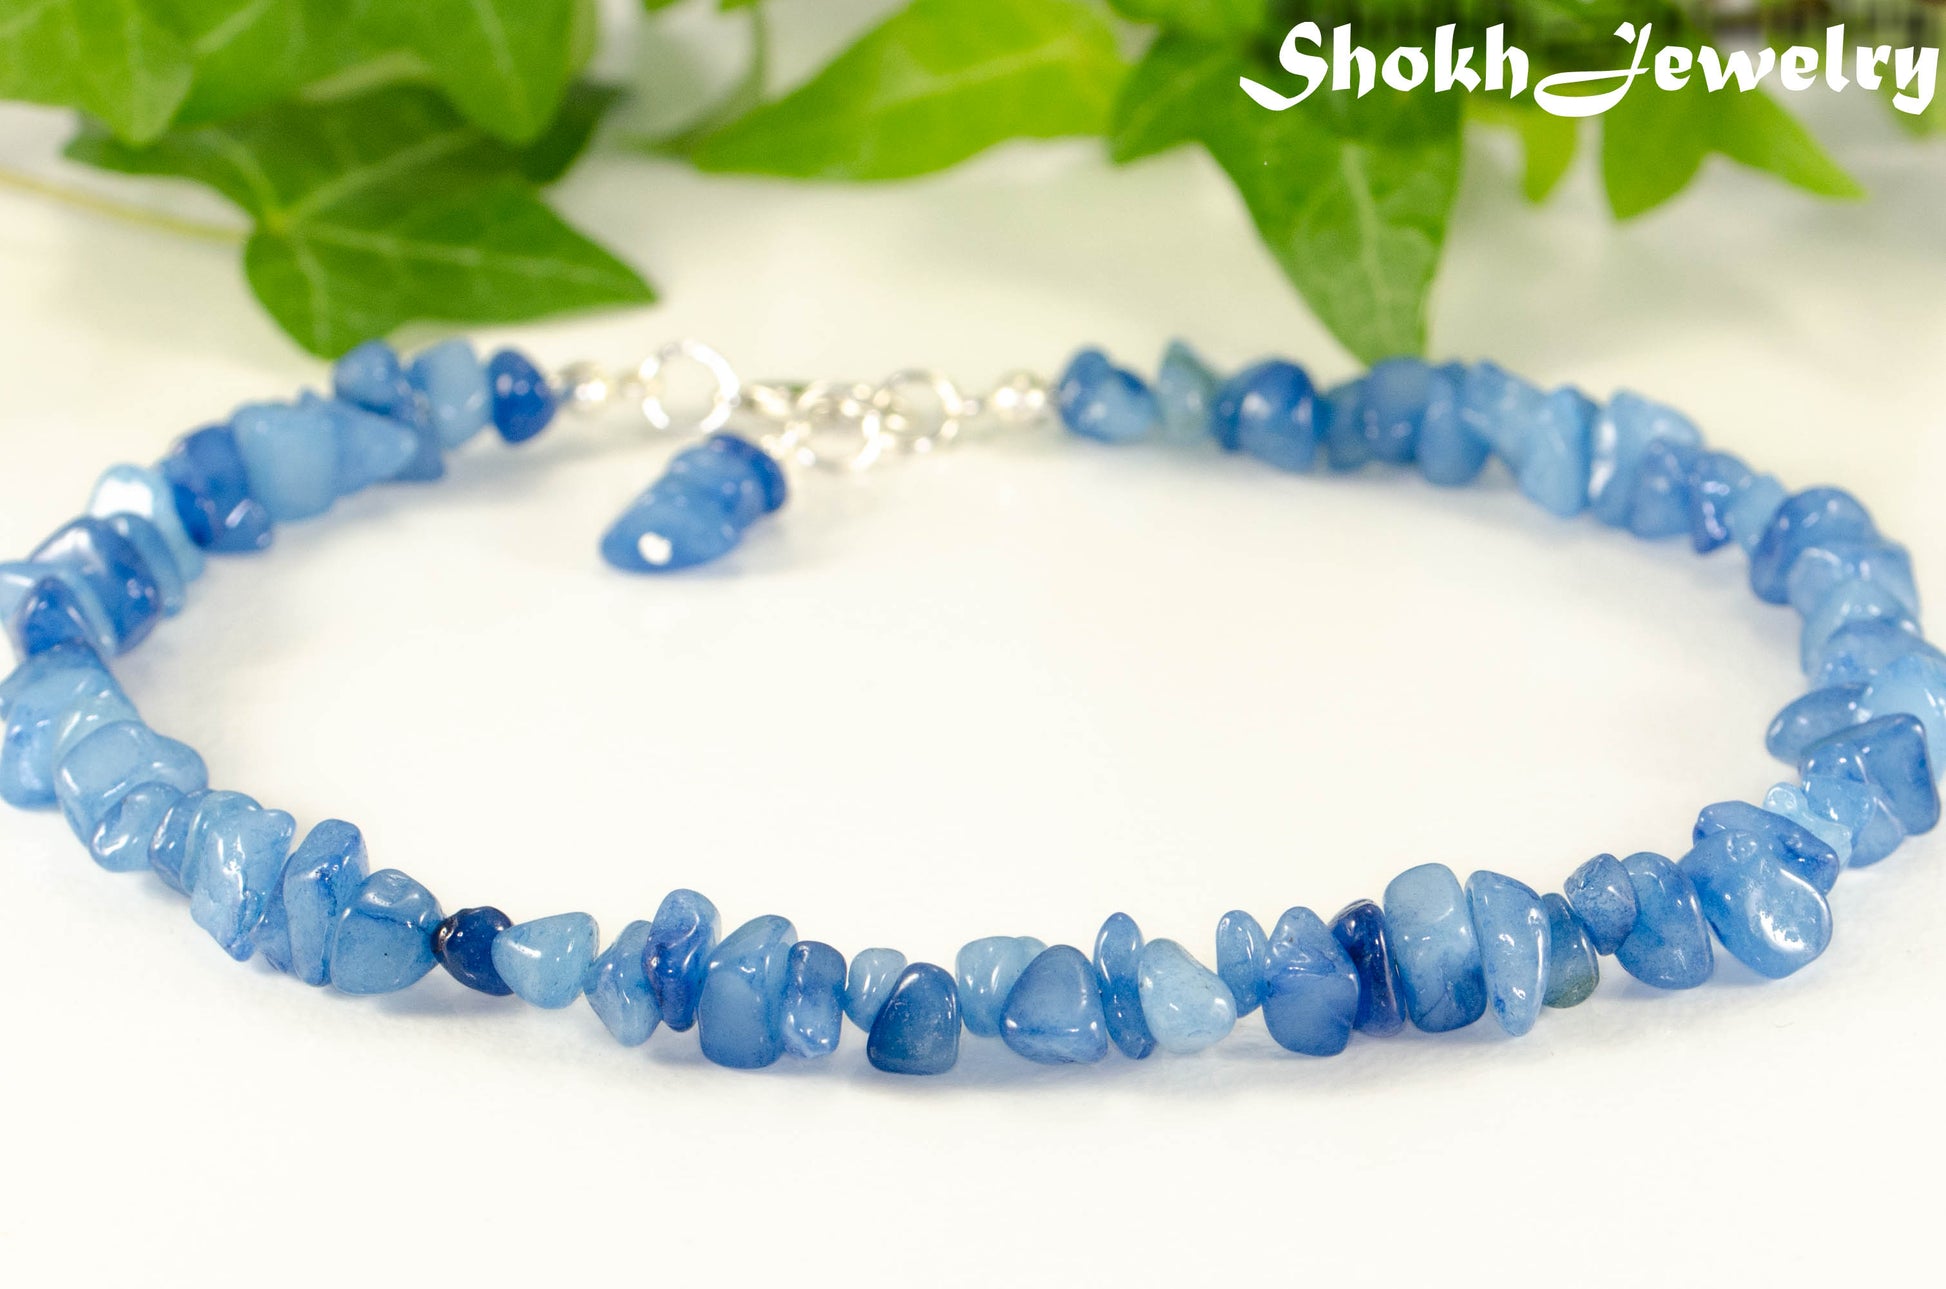 Close up of Natural Blue Quartzite Crystal Chip Choker Necklace